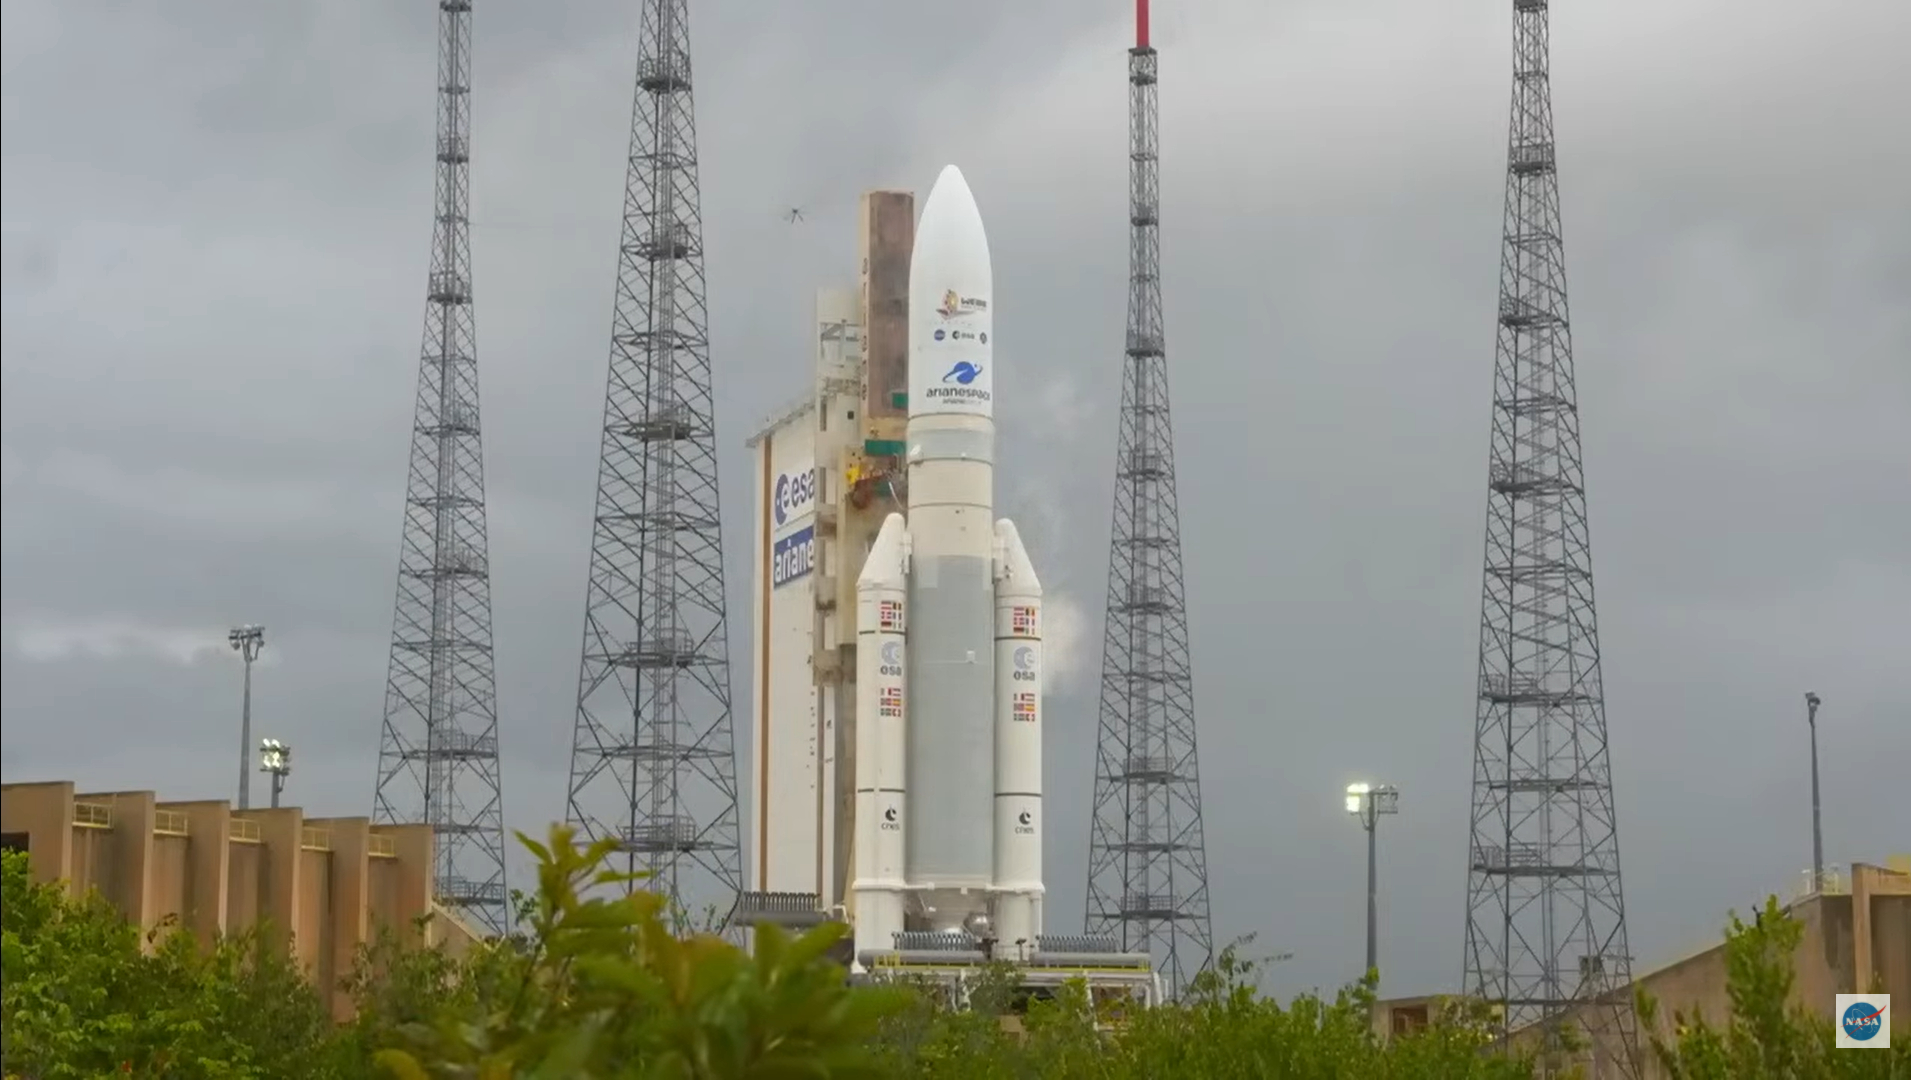 Daily News | Online News The Ariane 5 rocket carrying NASA's James Webb Space Telescope stands atop Launch Pad 3 at the Guiana Space Center in Kourou, French Guiana for launch on Dec. 25, 2021.